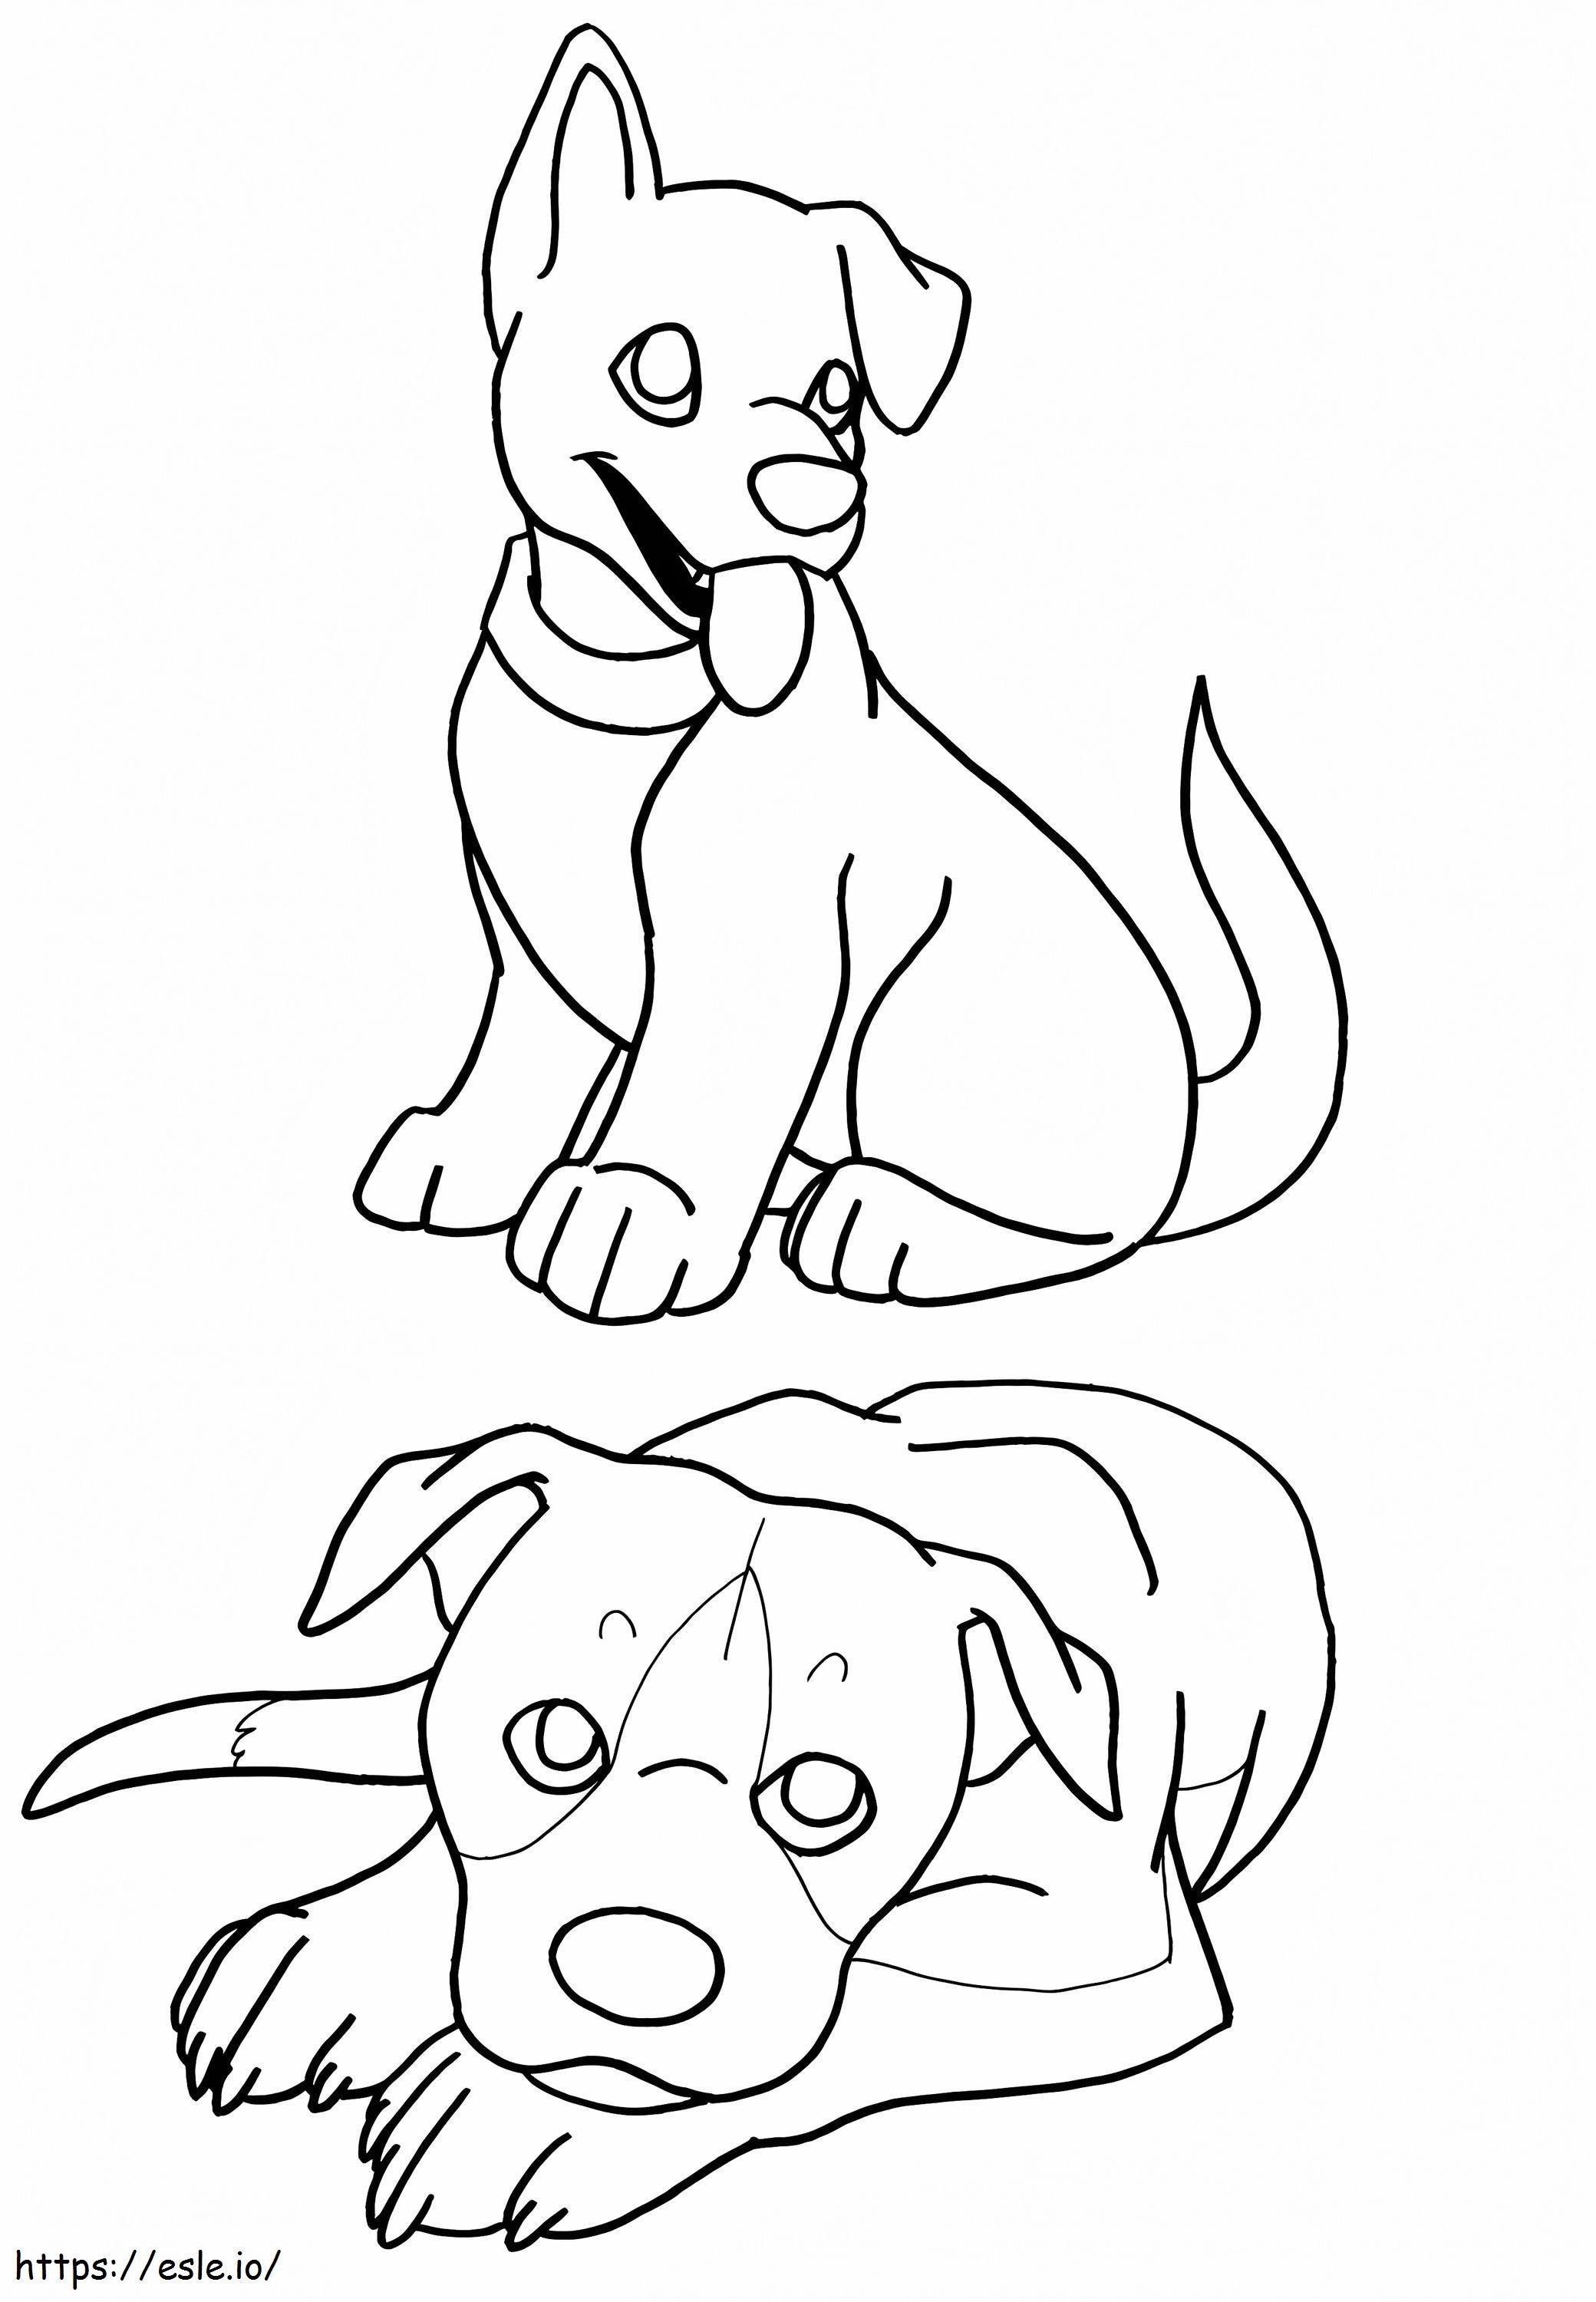 2 Puppy coloring page